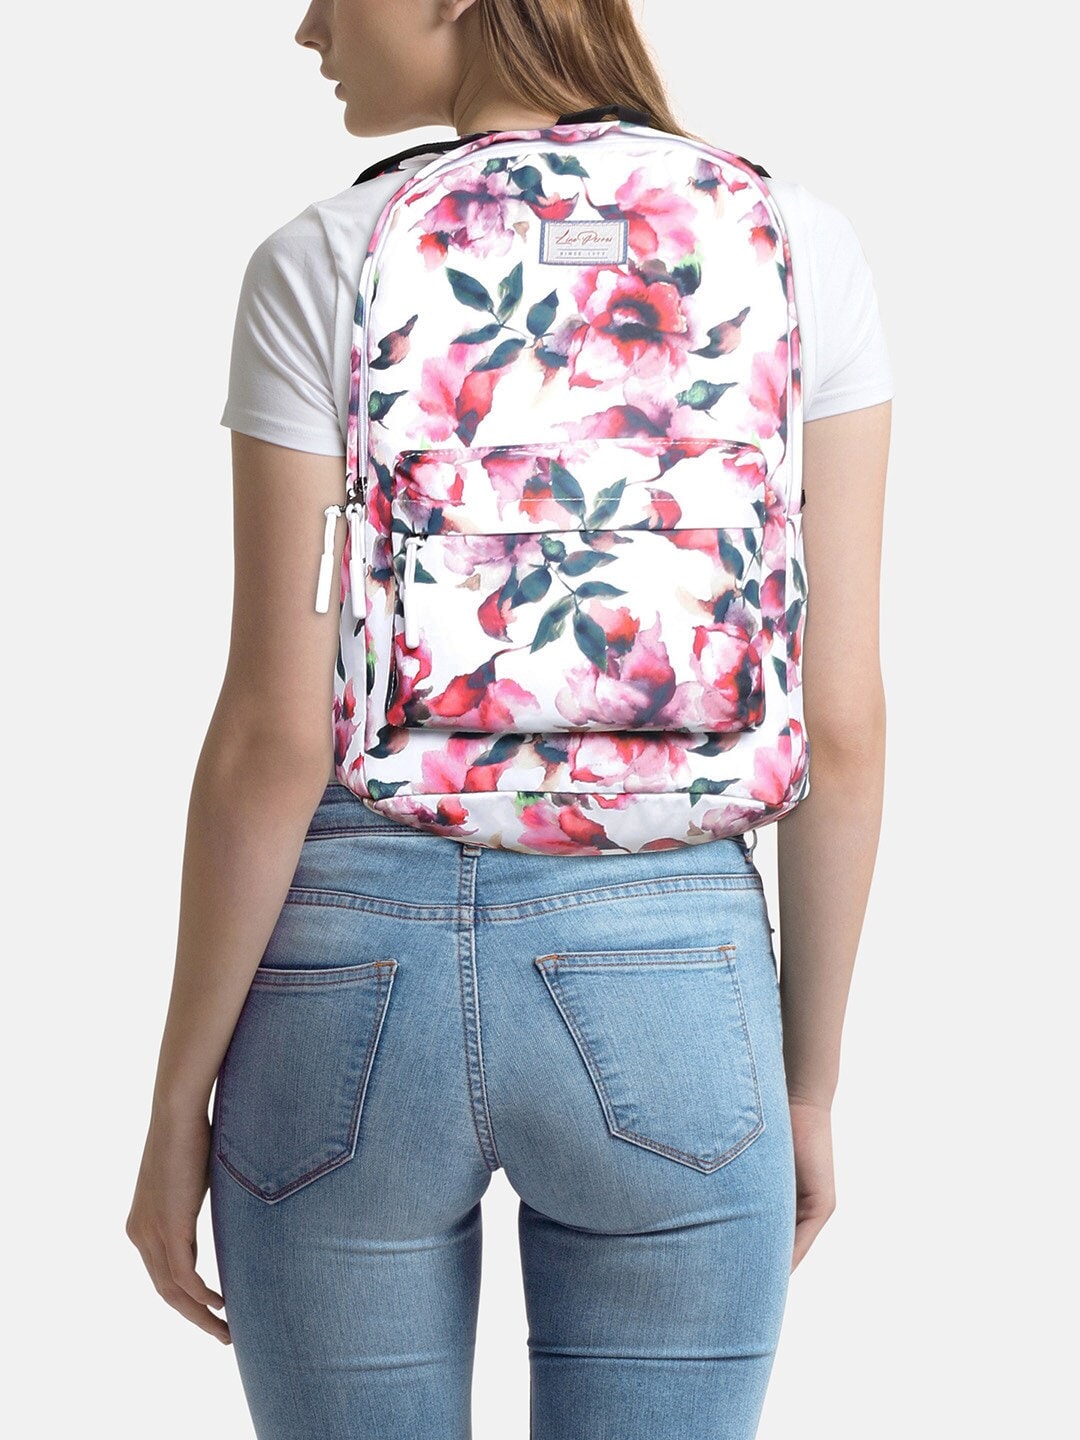 Lino Perros Women White & Pink Floral Print Laptop Backpack Price in India